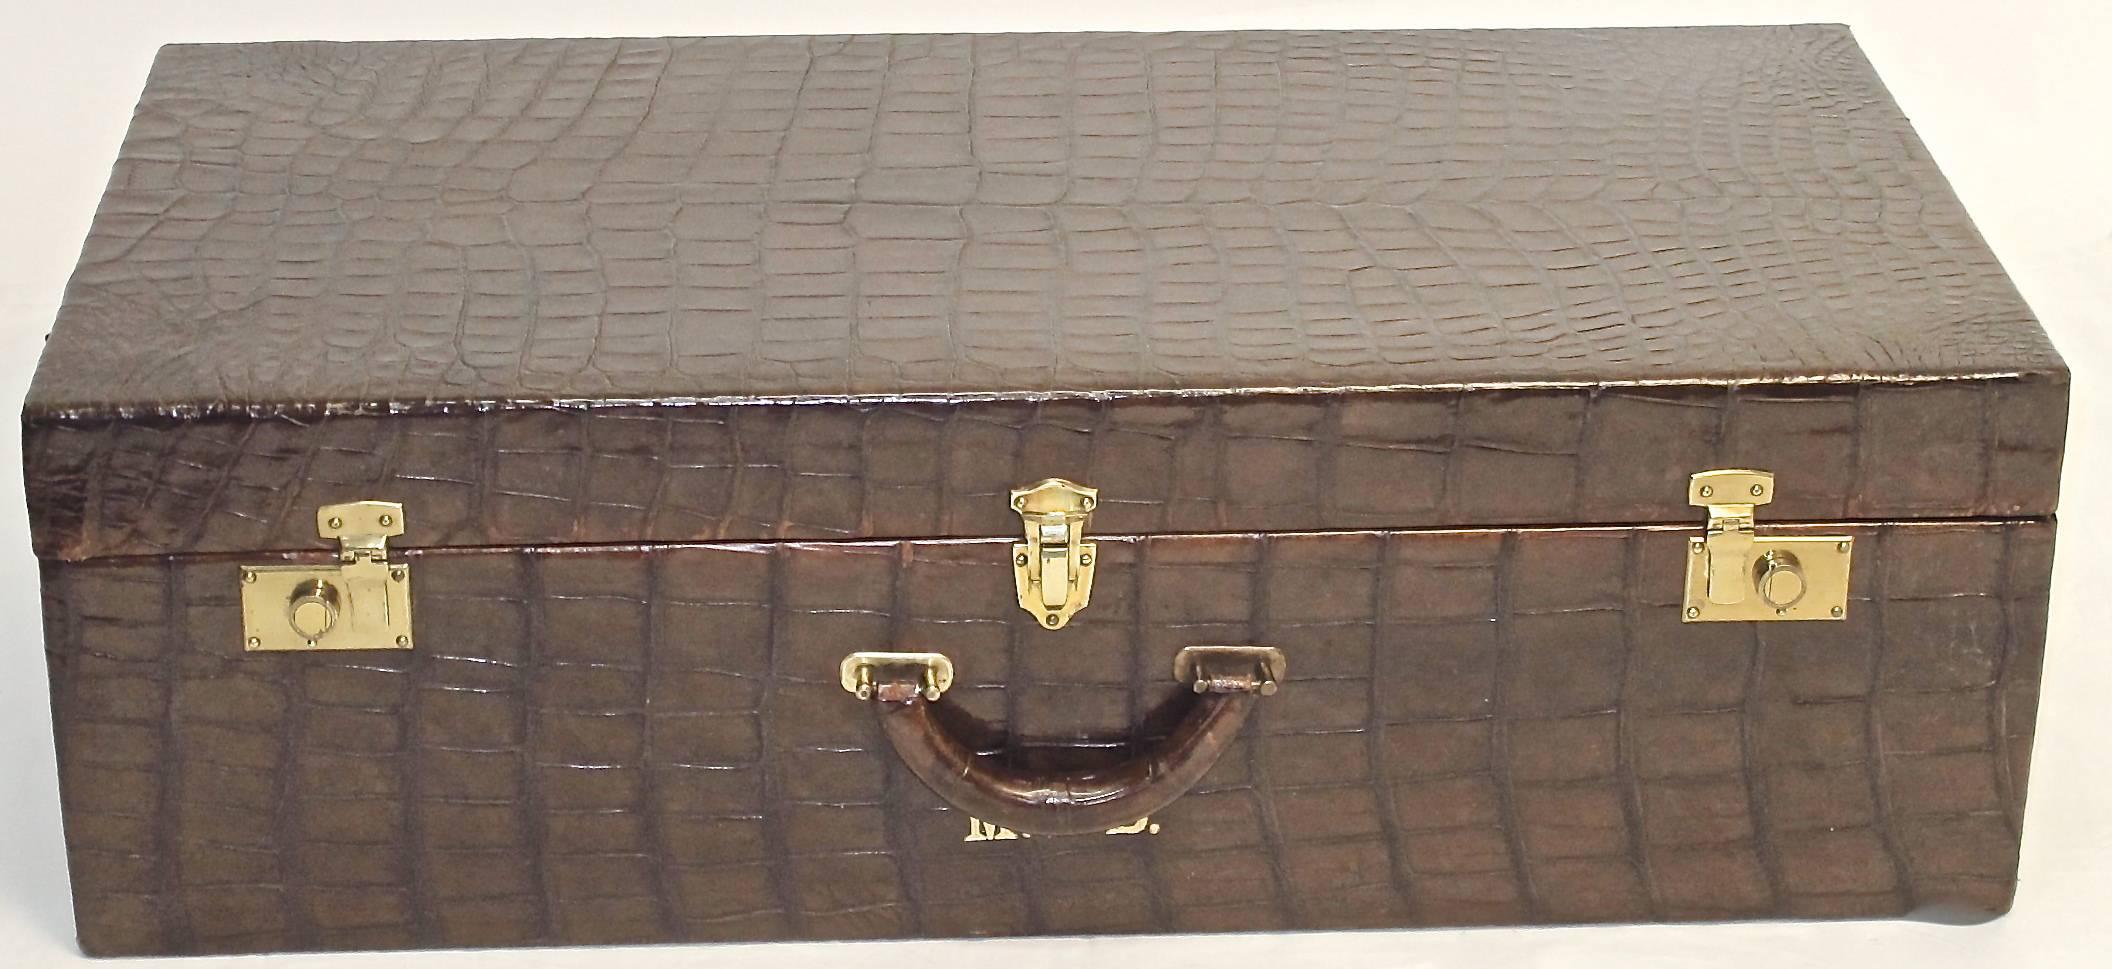 Custom alligator suit case from the 1920s or 1930s. With embossed gilt initials. Both ends trimmed out with small brass-headed tacks. Interior lined with silk satin stripe fabric and a fitted interior with stretch pouches and lift out shelf. Brass